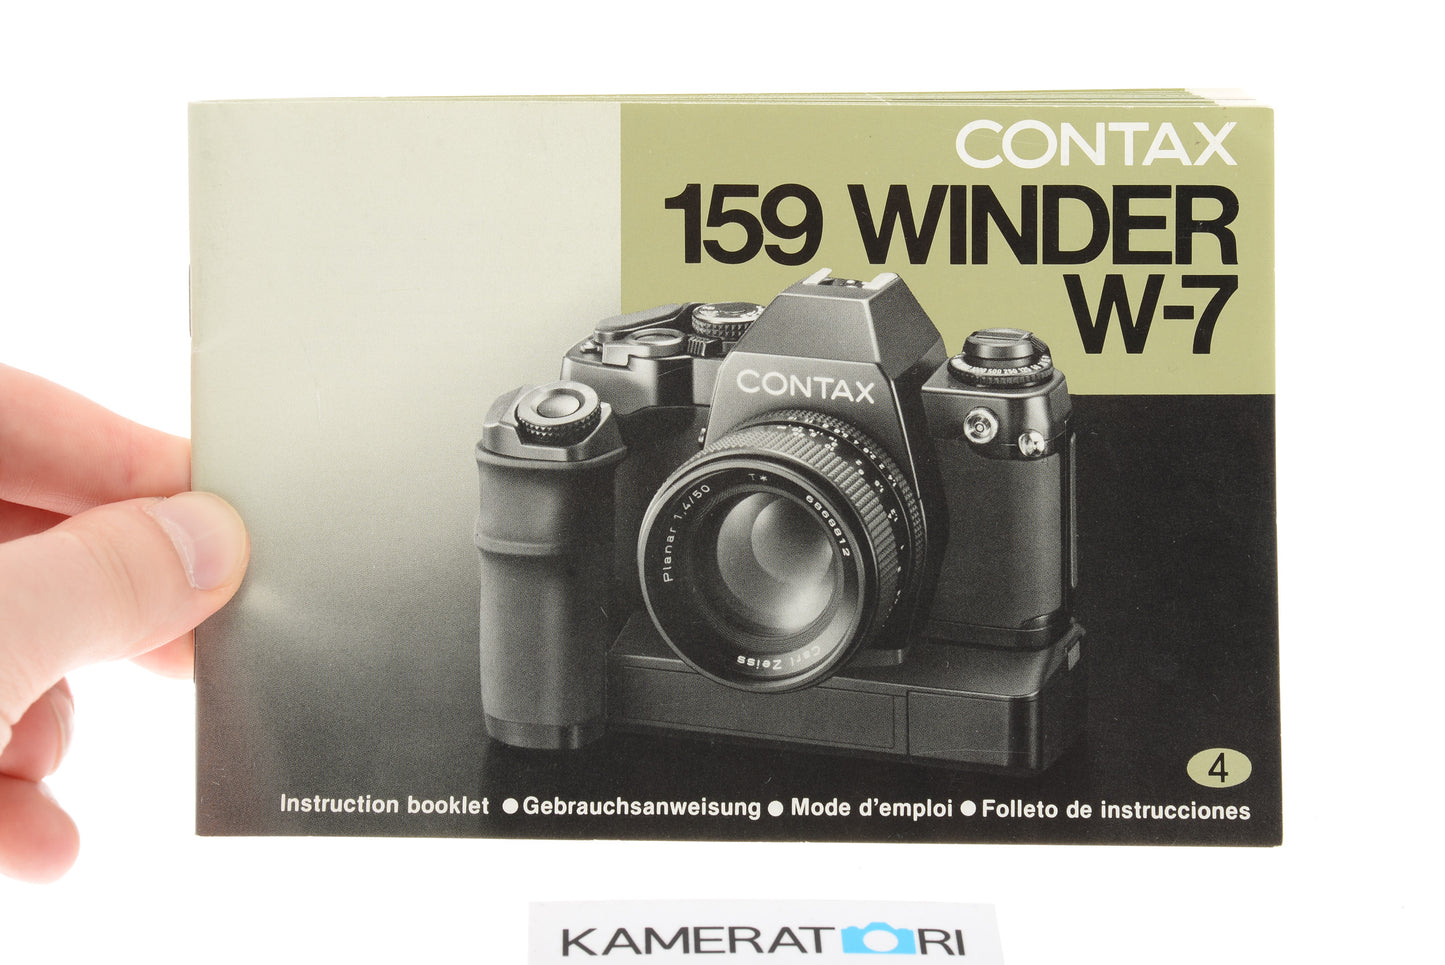 Contax 159 Winder W-7 Instruction Booklet